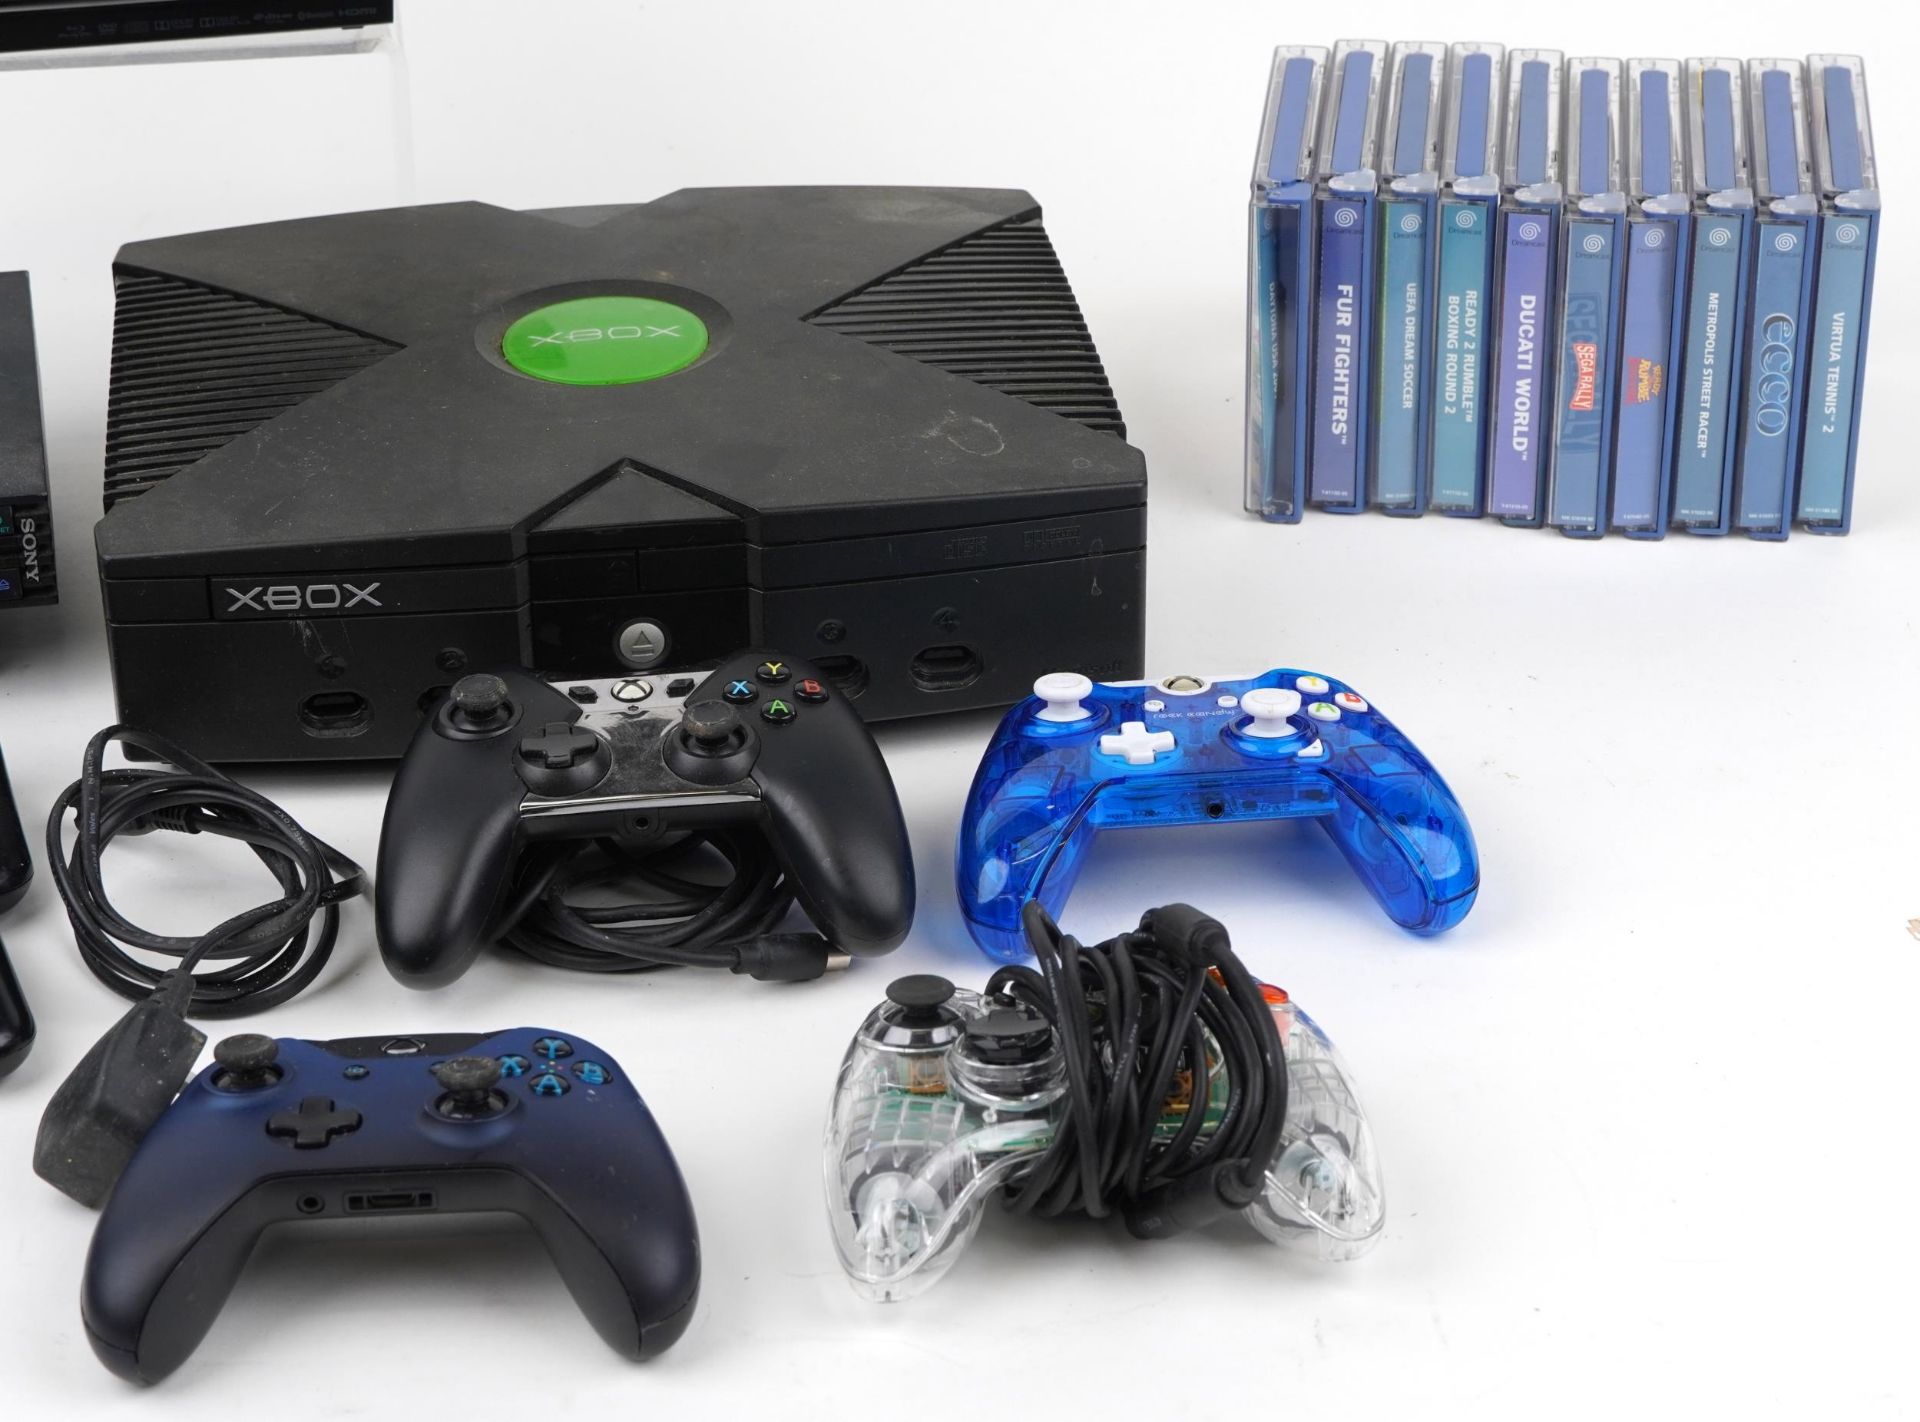 Three games consoles, games and controllers comprising Xbox, Sony PlayStation 2, Sony PlayStation - Image 4 of 4